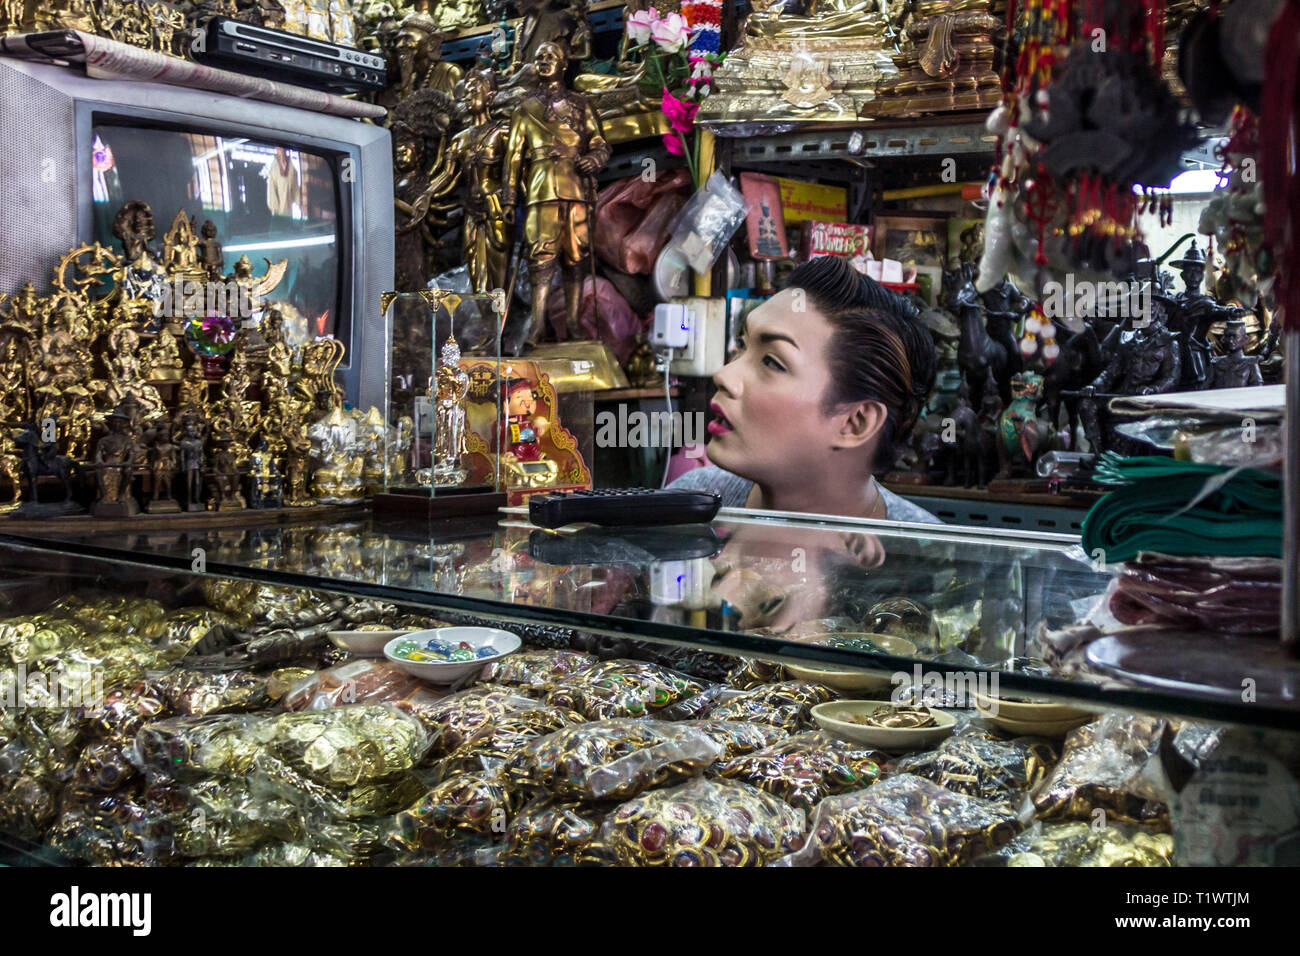 A man looks at the monitor screen in the souvenir shop of the Buddha Temple in Bangkok, Thailand Stock Photo